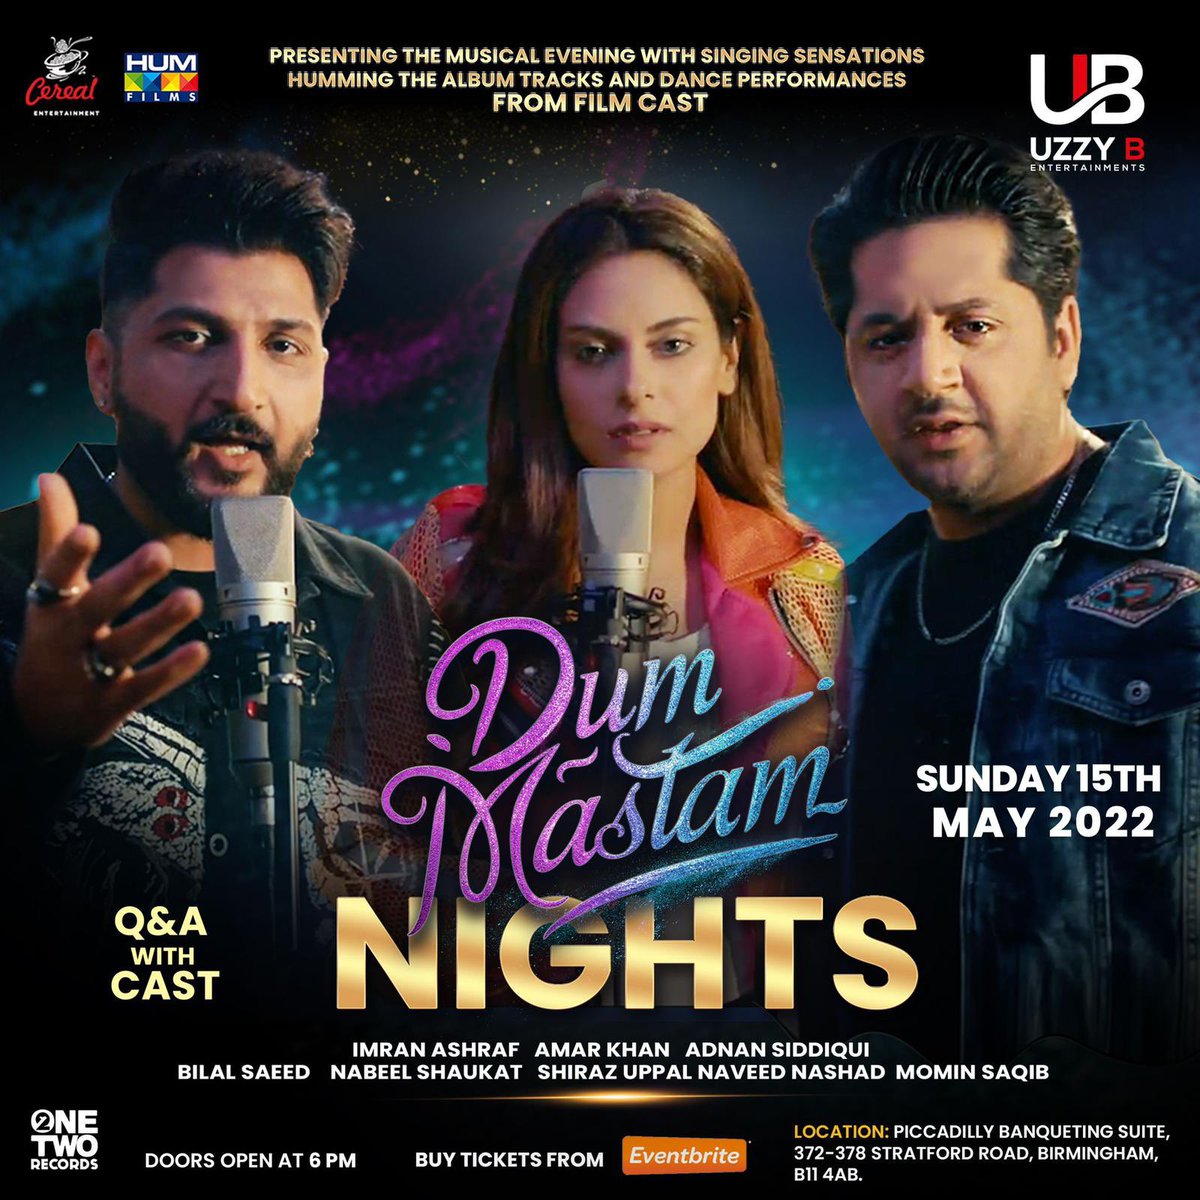 See you shortly, UK for #DumMastam nights. London and Birmingham, here we come!